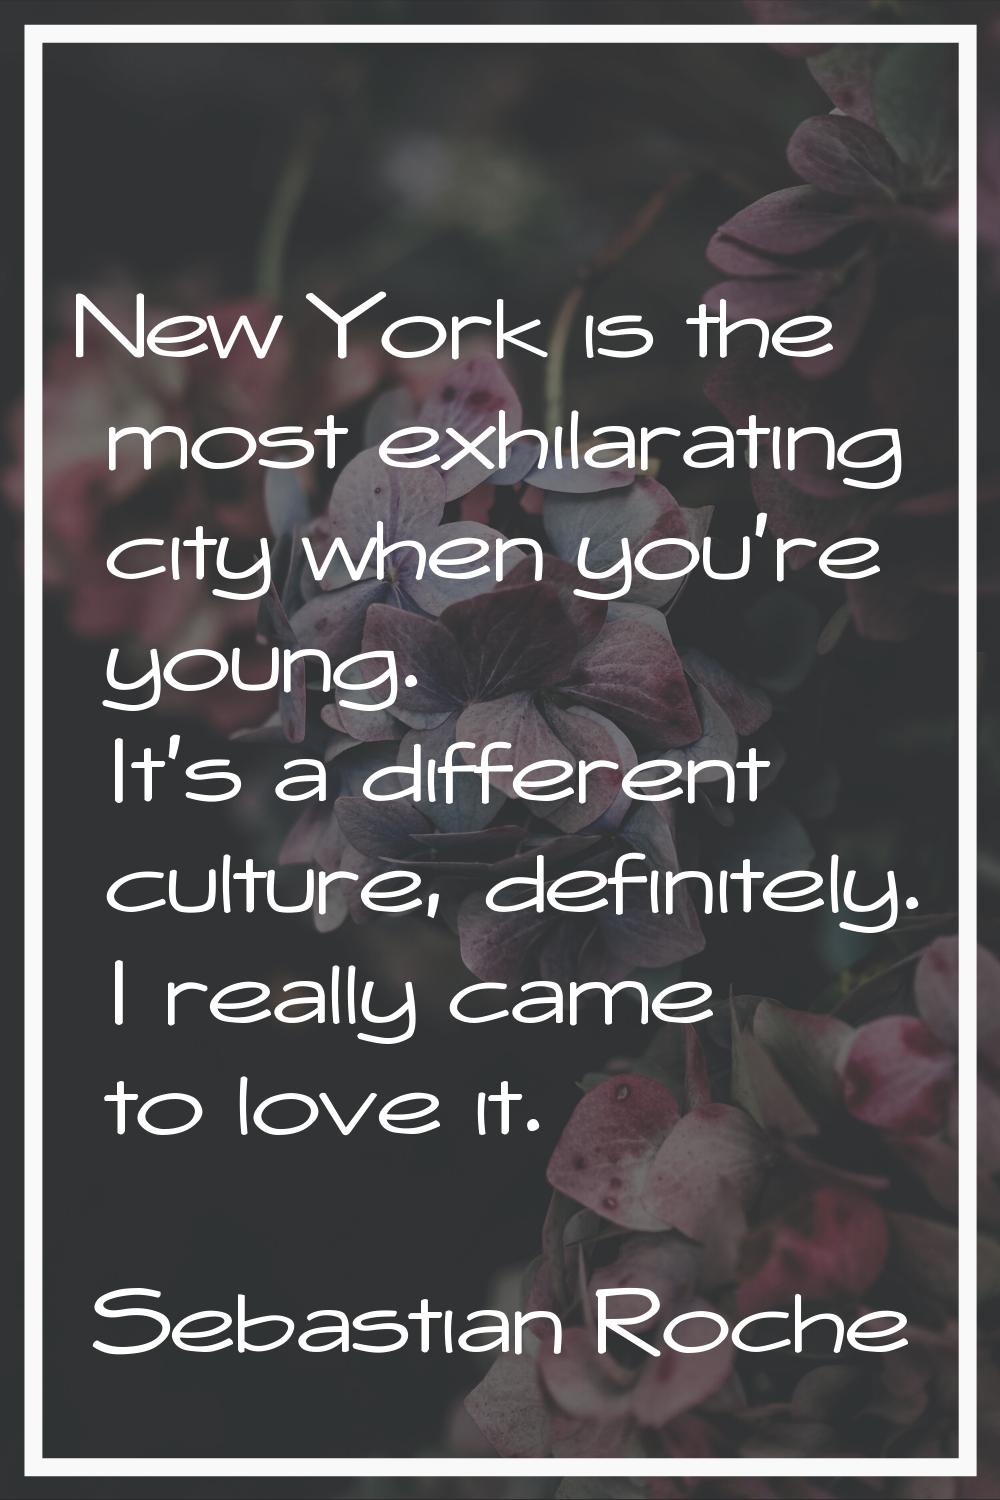 New York is the most exhilarating city when you're young. It's a different culture, definitely. I r